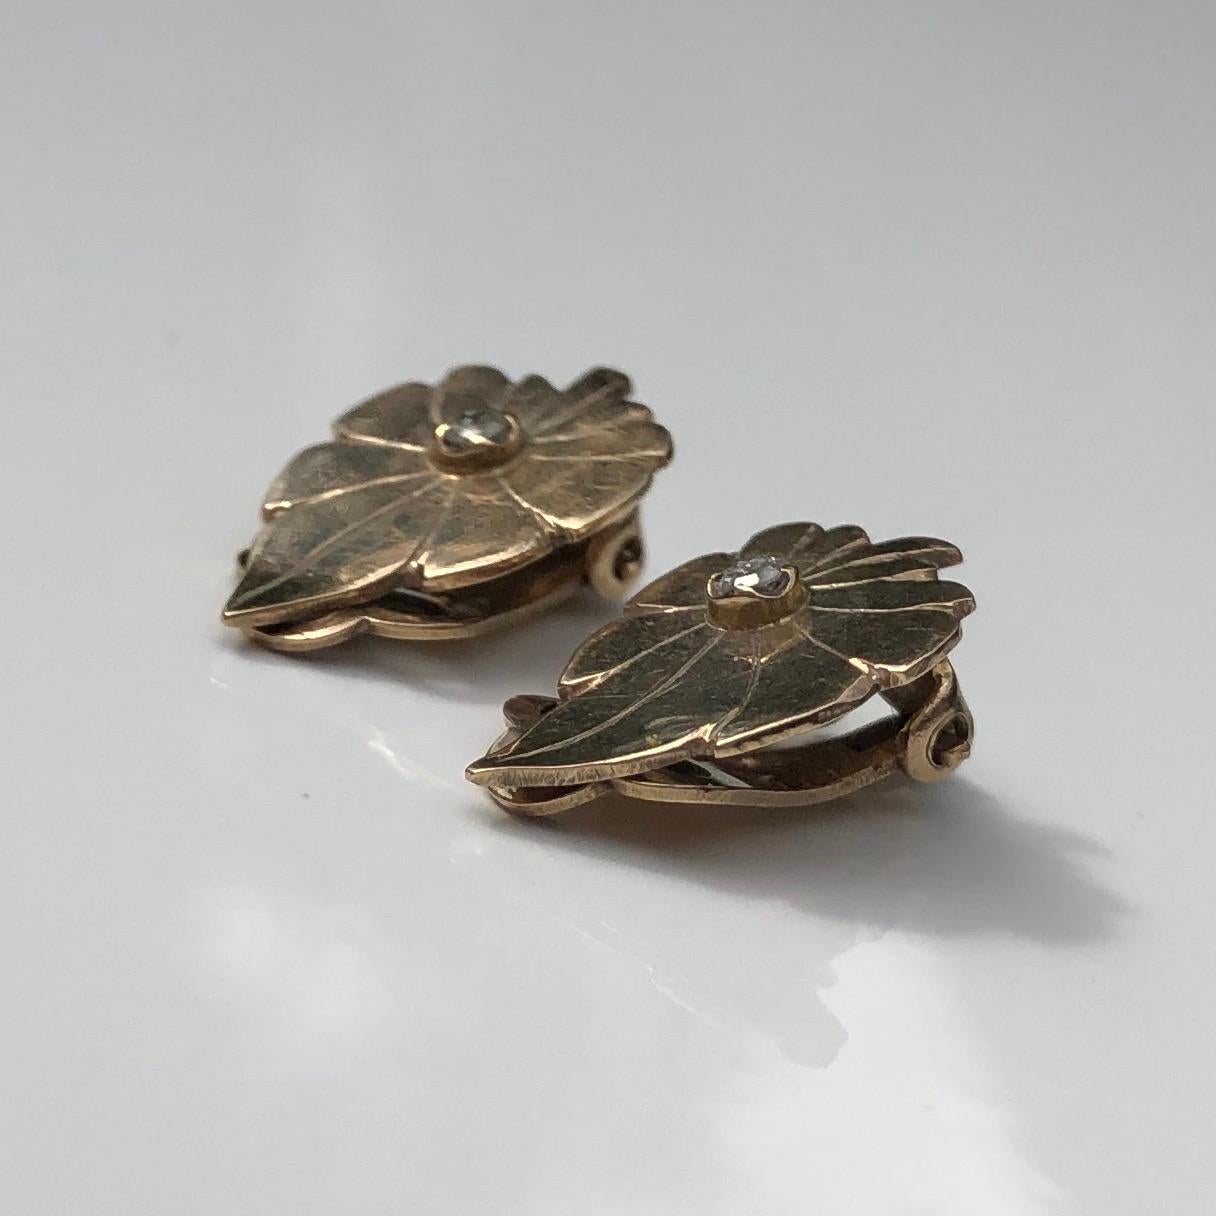 These gorgeous leaf earrings are modelled in 9ct gold and have a diamonds measuring 5pts on each one. The earrings are clip on and the face of them are gorgeously glossy!

Leaf Dimensions: 17x11mm 

Weight: 2.9g